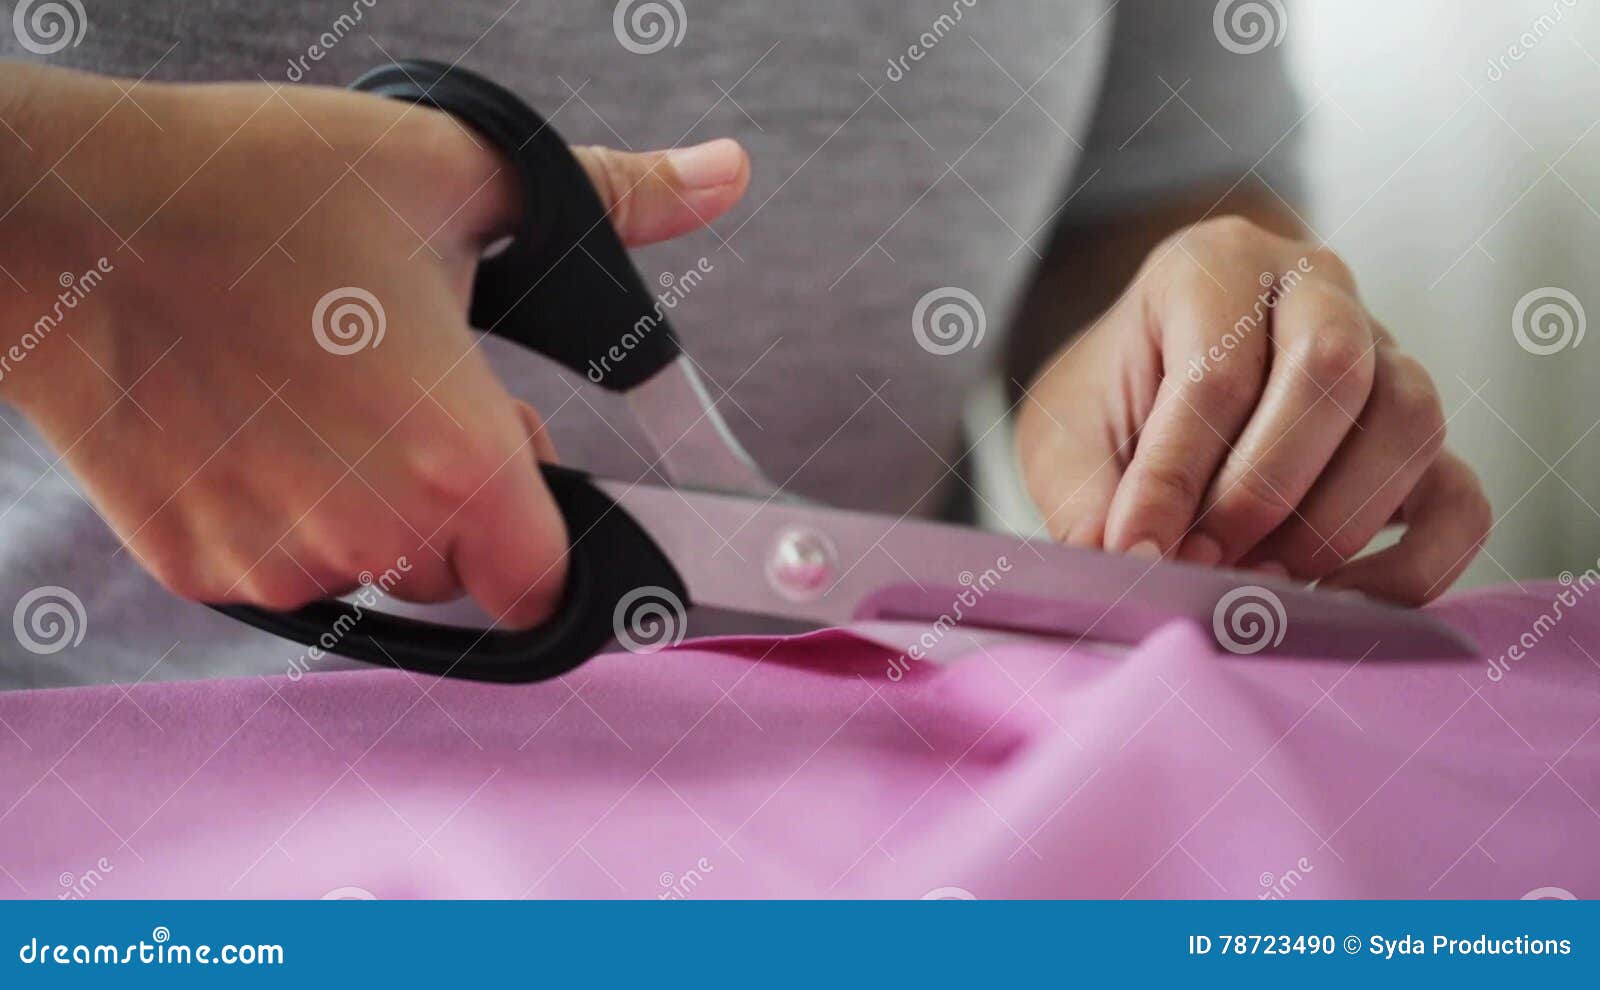 Woman With Tailor Scissors Cutting Out Fabric 38, People Stock